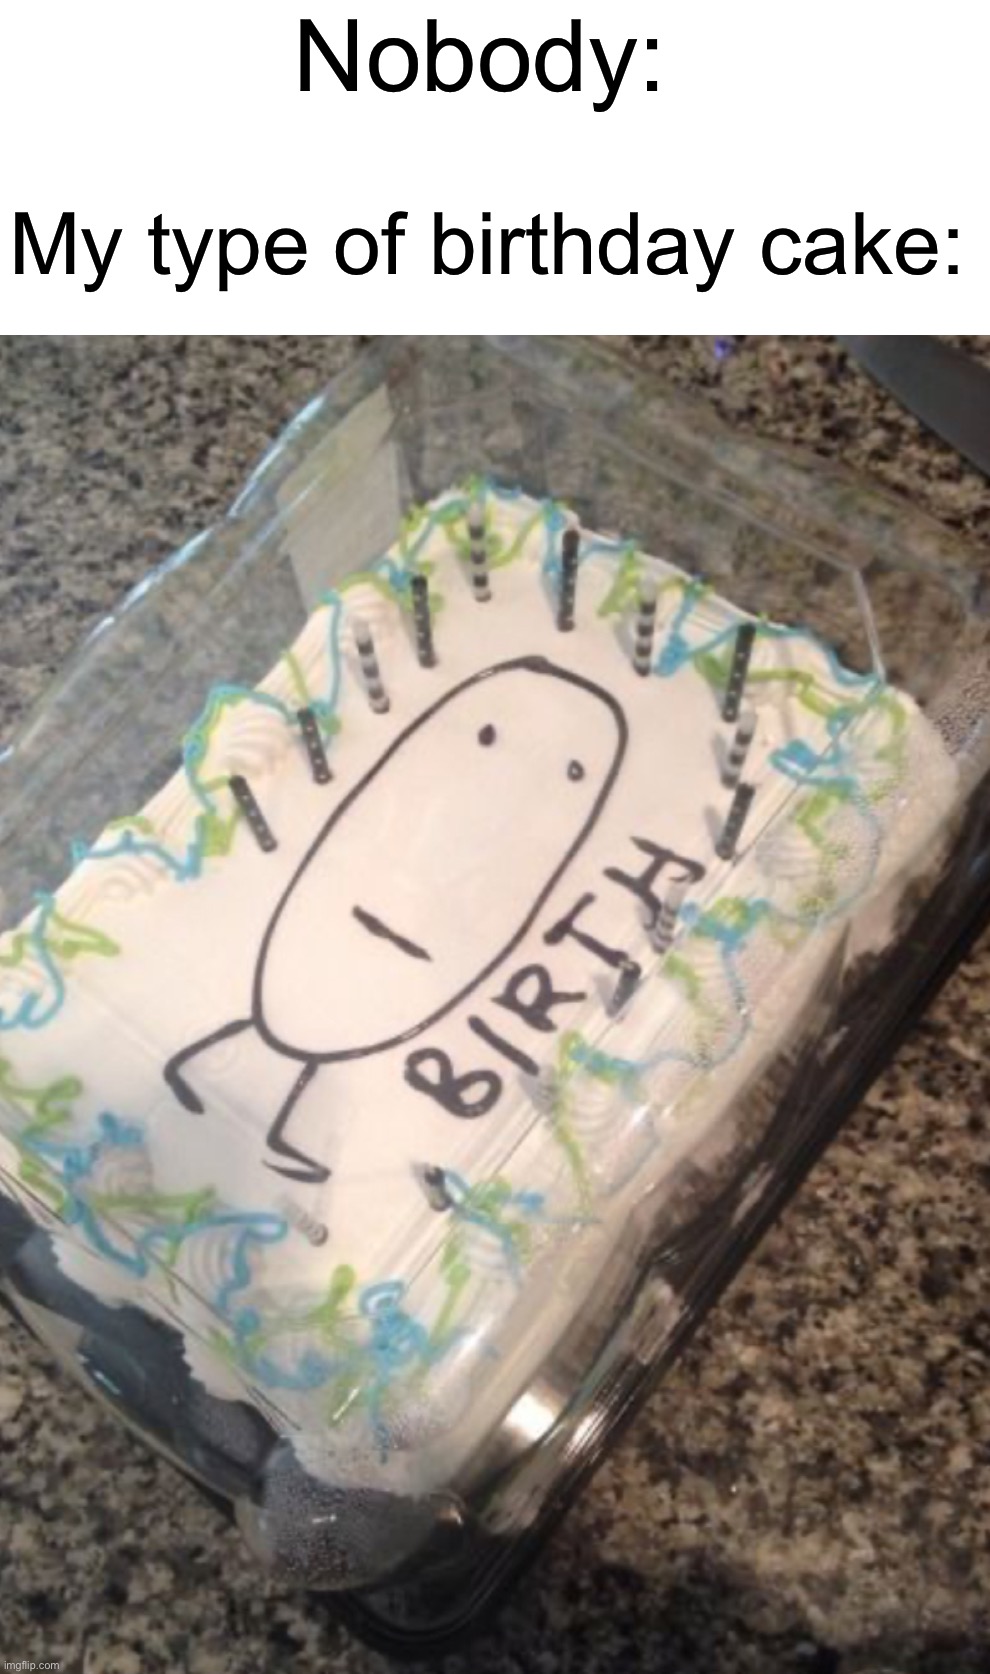 Smrt | Nobody:; My type of birthday cake: | image tagged in memes,funny,smart,birthday,cake,wait what | made w/ Imgflip meme maker